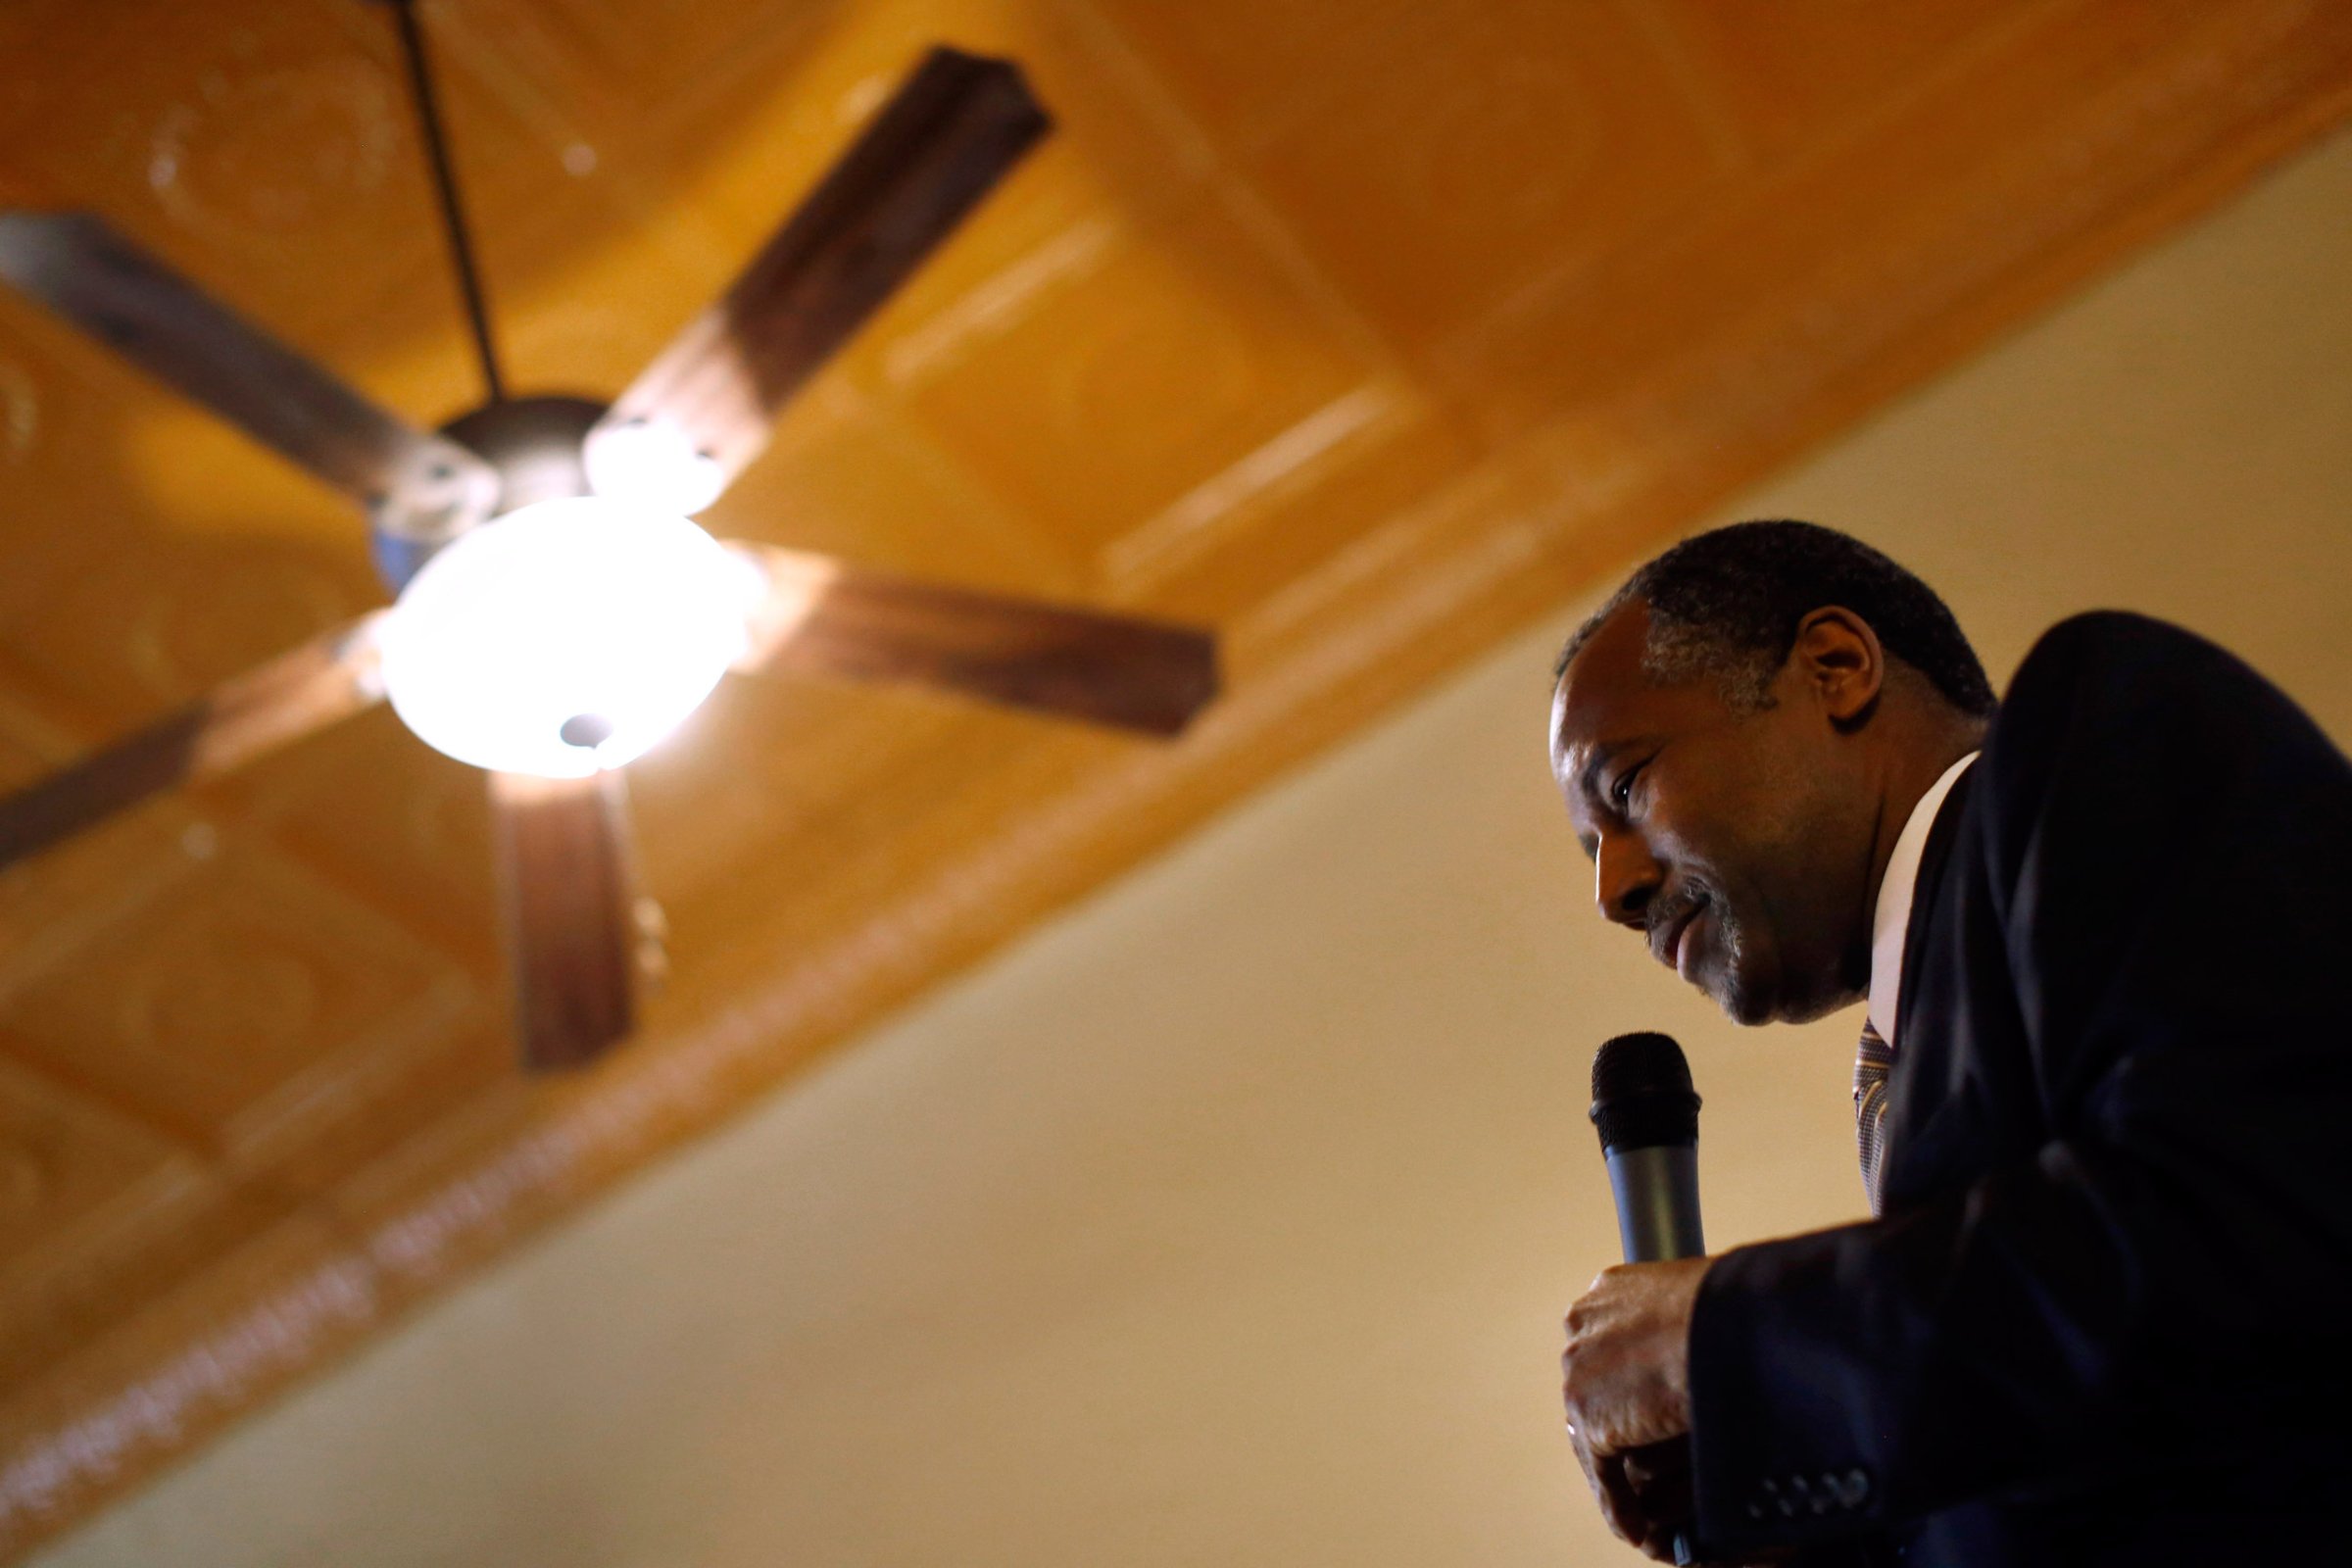 Republican presidential candidate Dr. Ben Carson speaks during a town hall at Adams Street Espresso and Soda Shoppe in Creston, Iowa, Friday, Jan. 22, 2016. (AP Photo/Patrick Semansky)